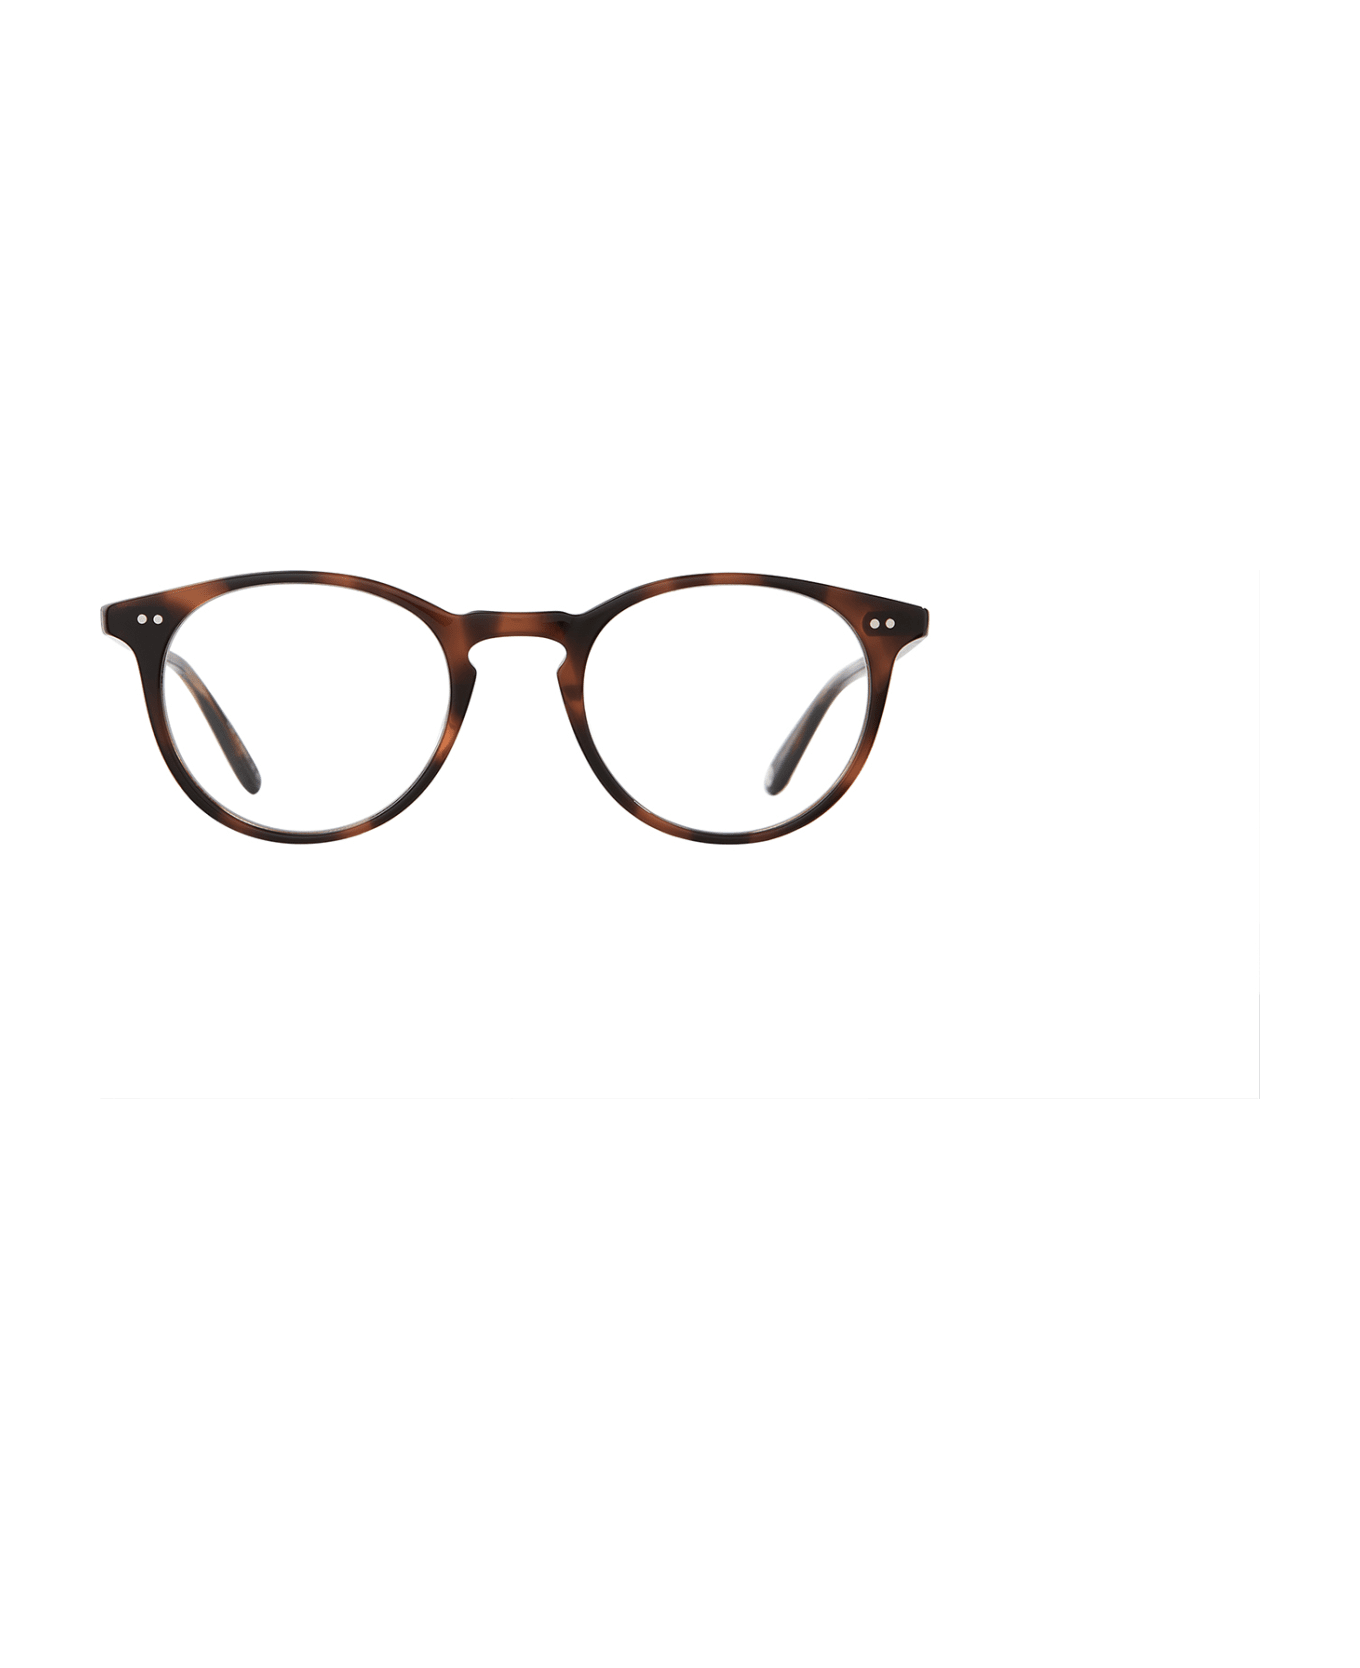 Garrett Leight Winward Spotted Brown Shell Glasses - Spotted Brown Shell アイウェア